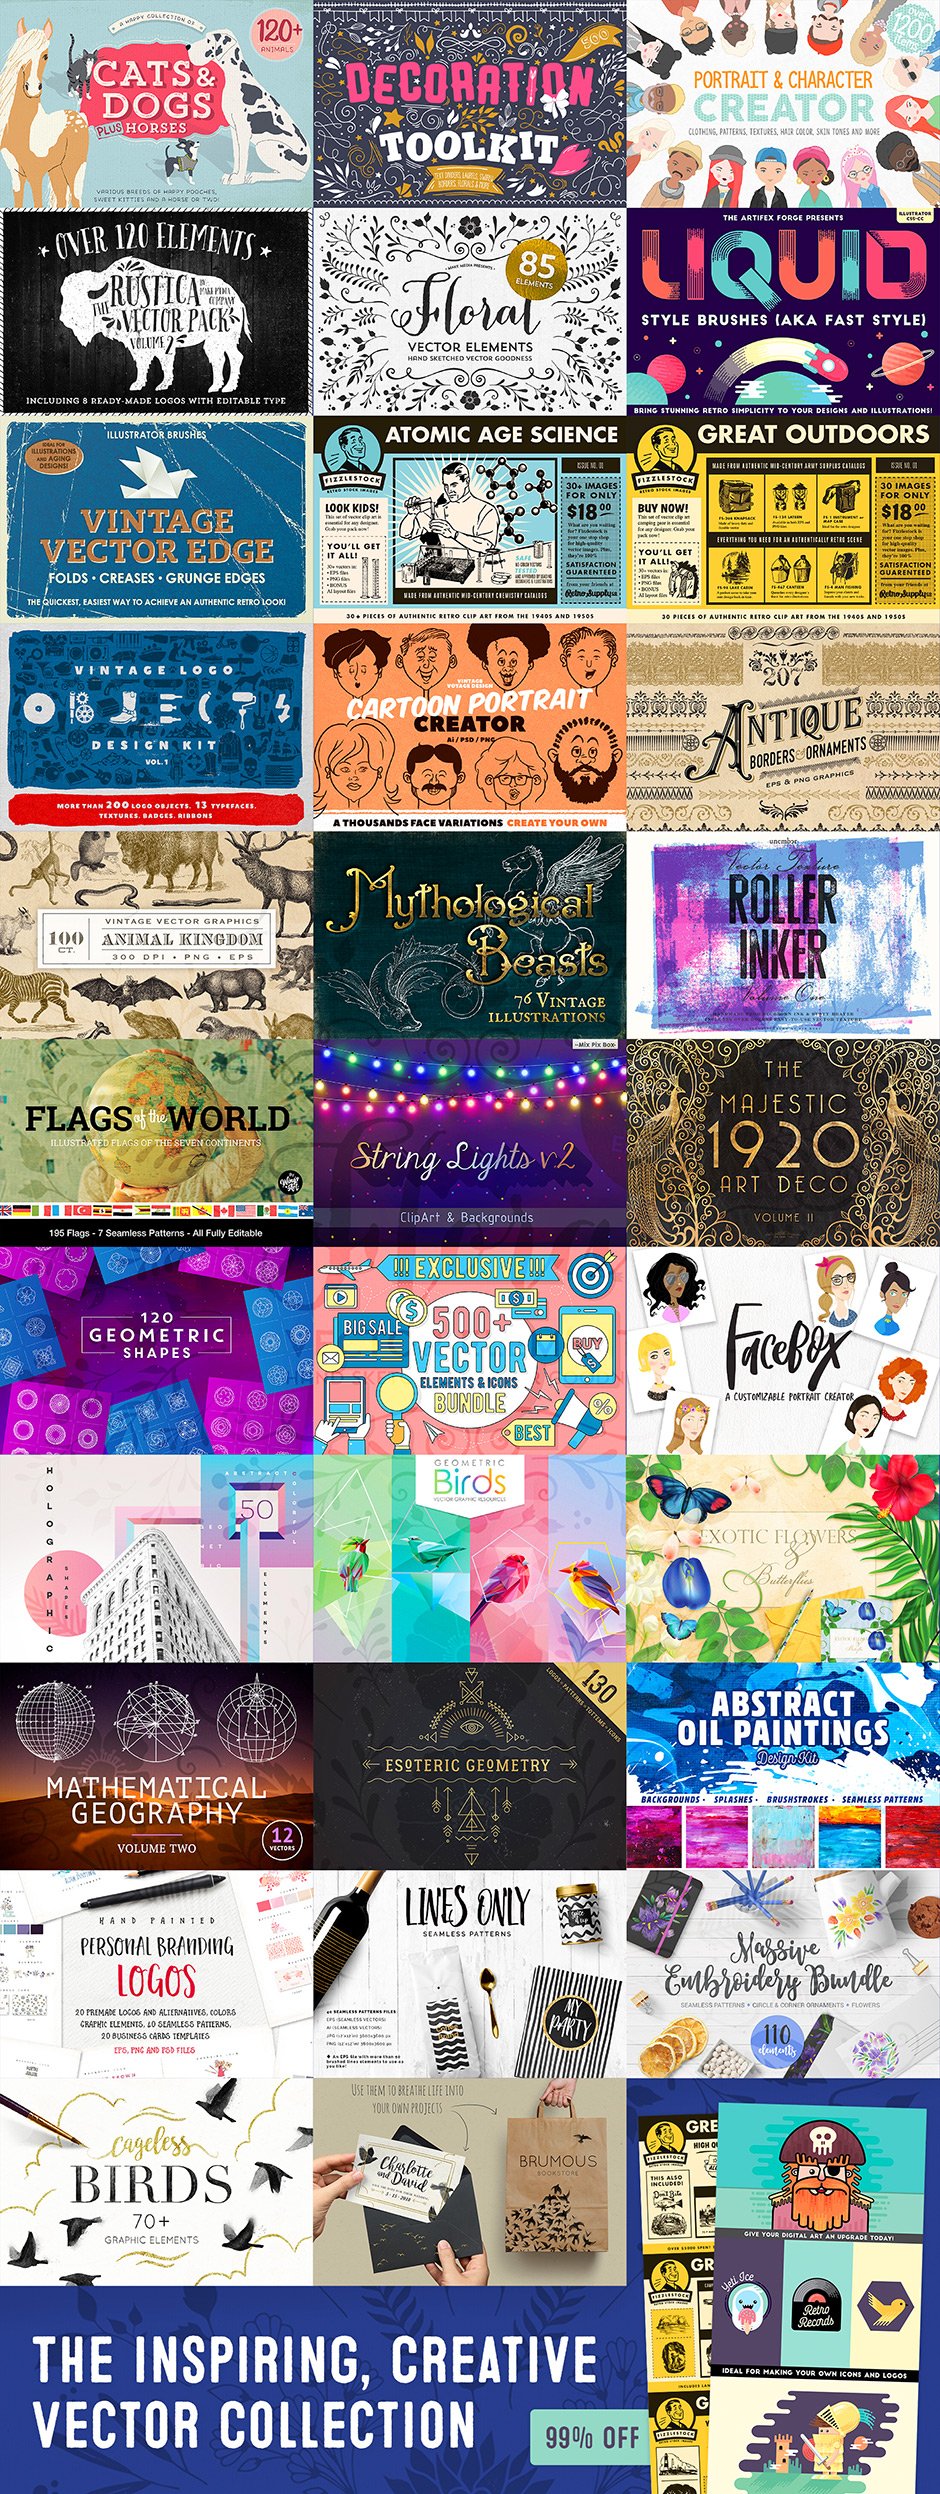 Save $2503 on The Inspiring, Creative Vector Collection